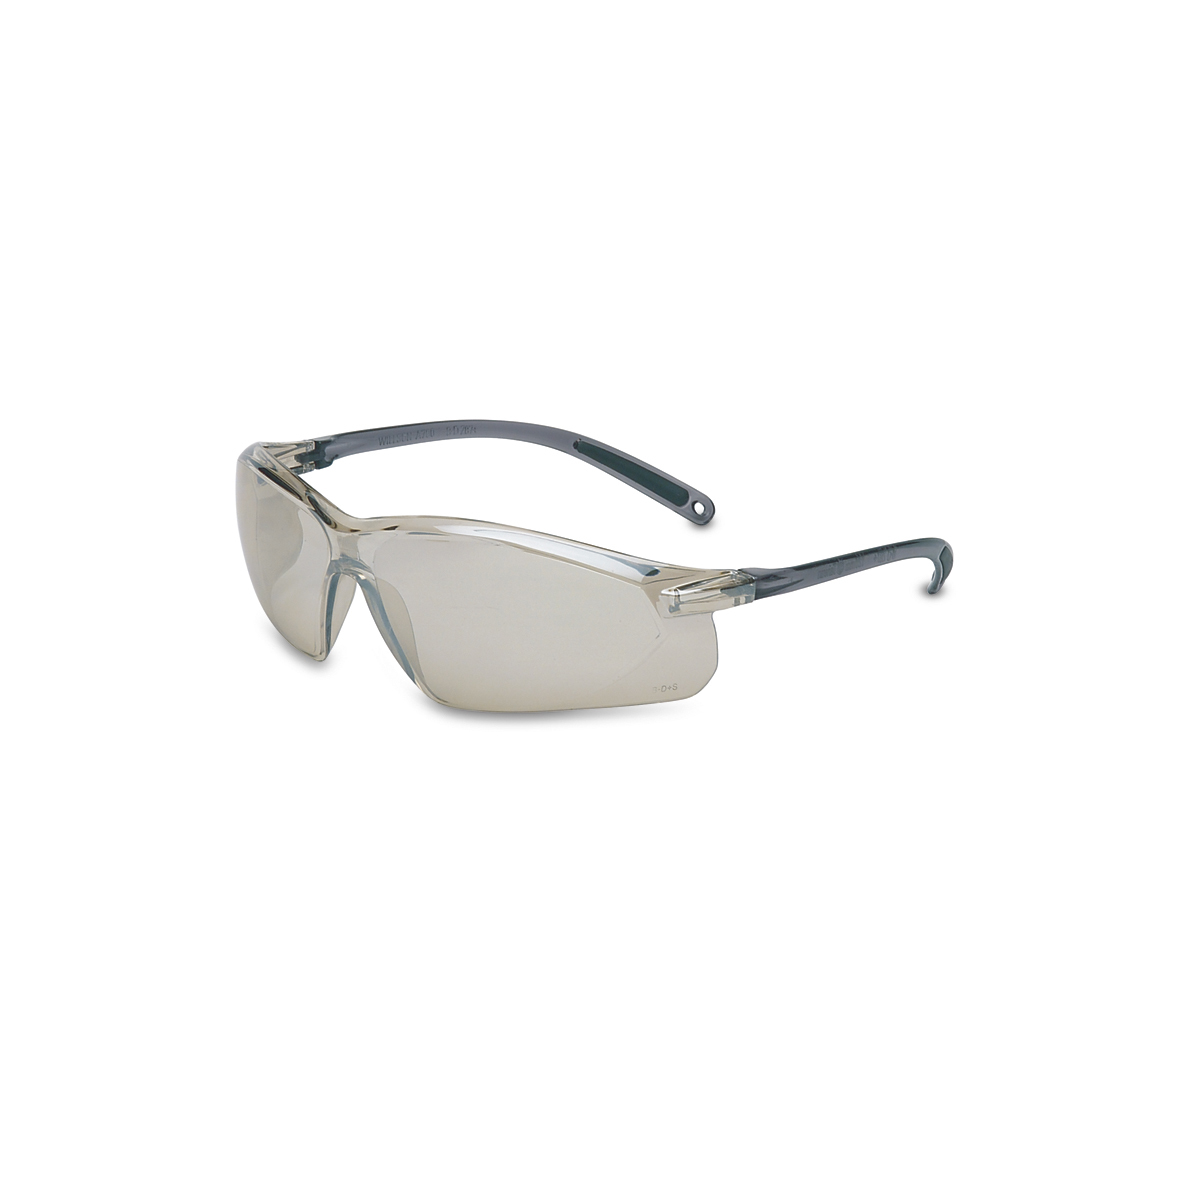 Honeywell Uvex® A700 Gray Safety Glasses With Gray Mirror/Anti-Scratch/Indoor/Outdoor/Hard Coat Lens (Availability restrictions